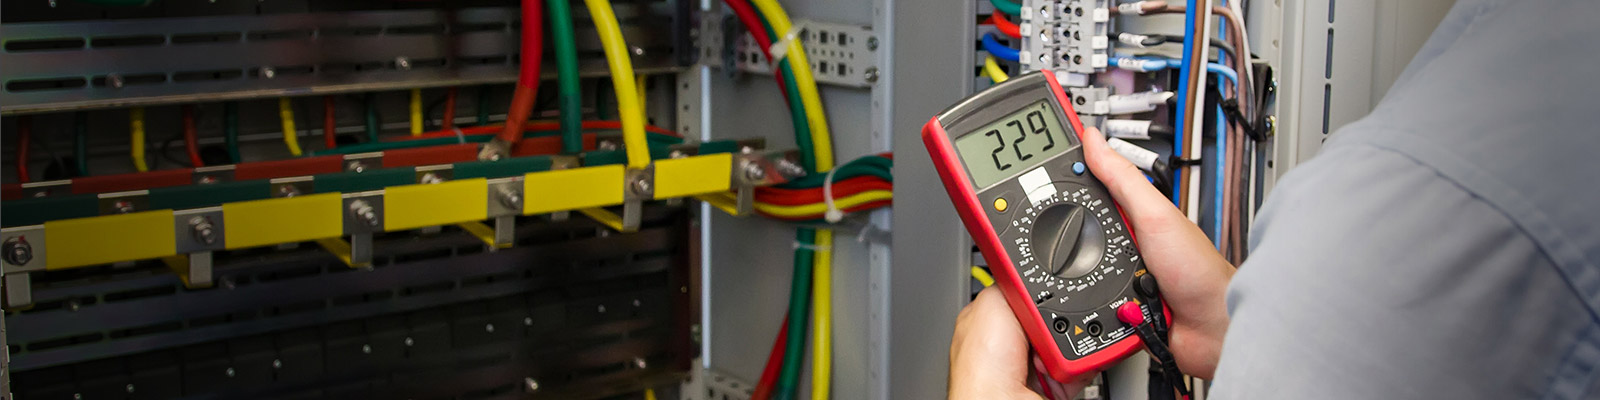 ElectricianTesting Cable with Multimeter